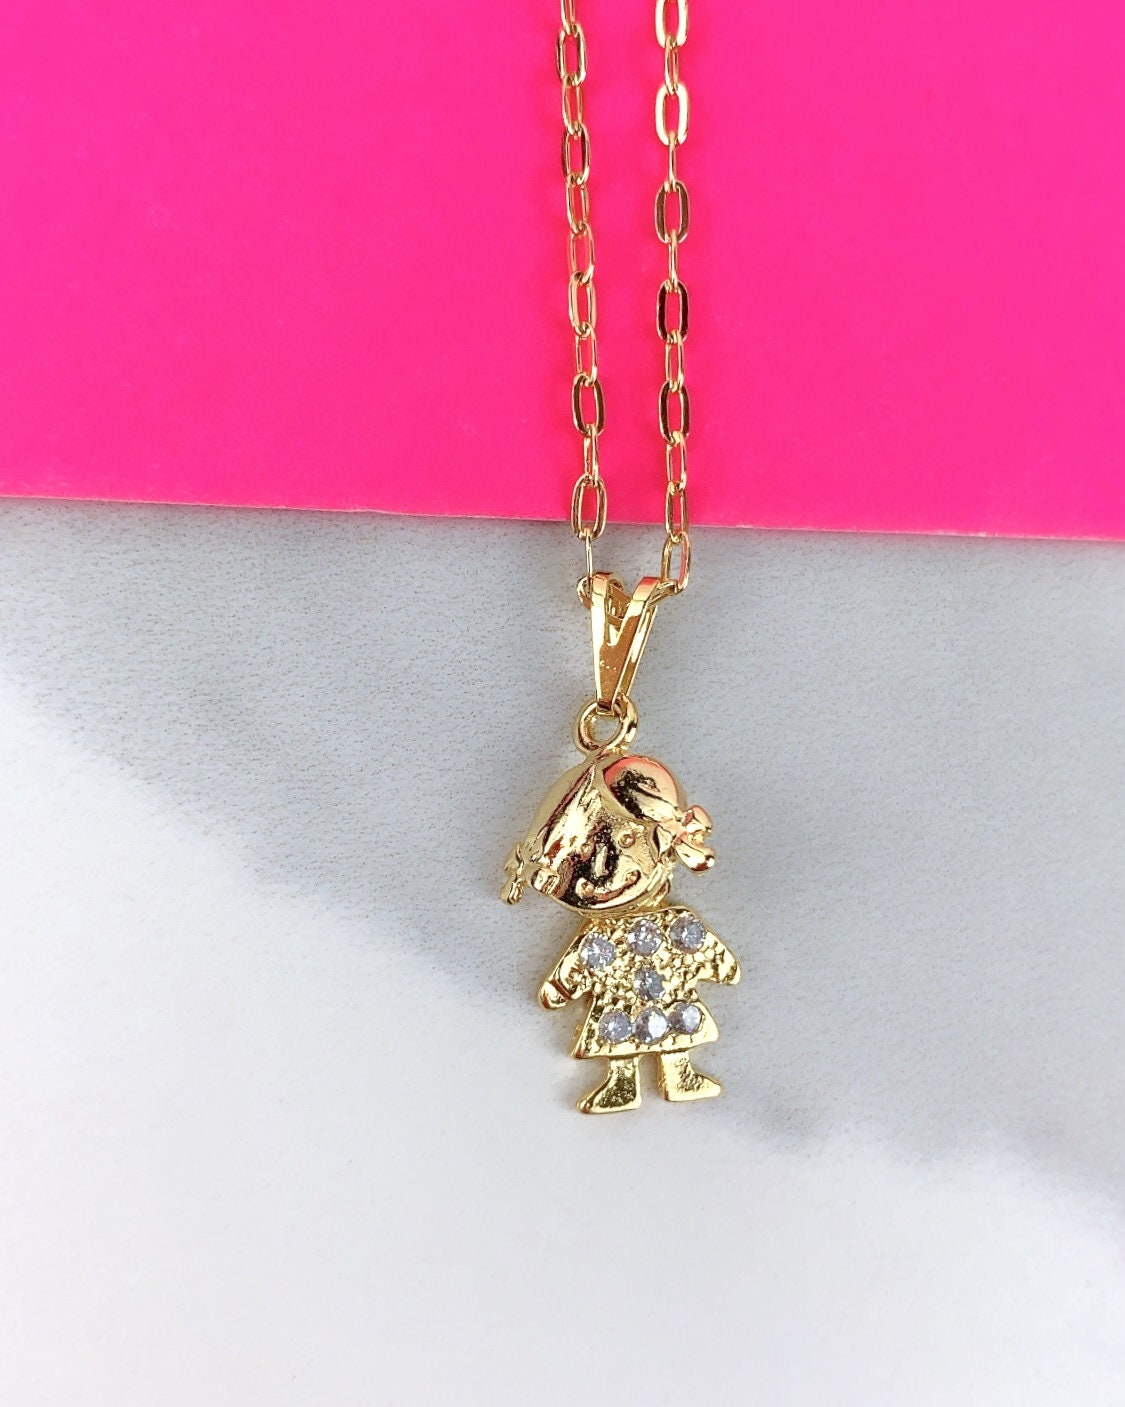 18K Gold Plated Kids Charms Family Necklace w Chain Boys n Girls